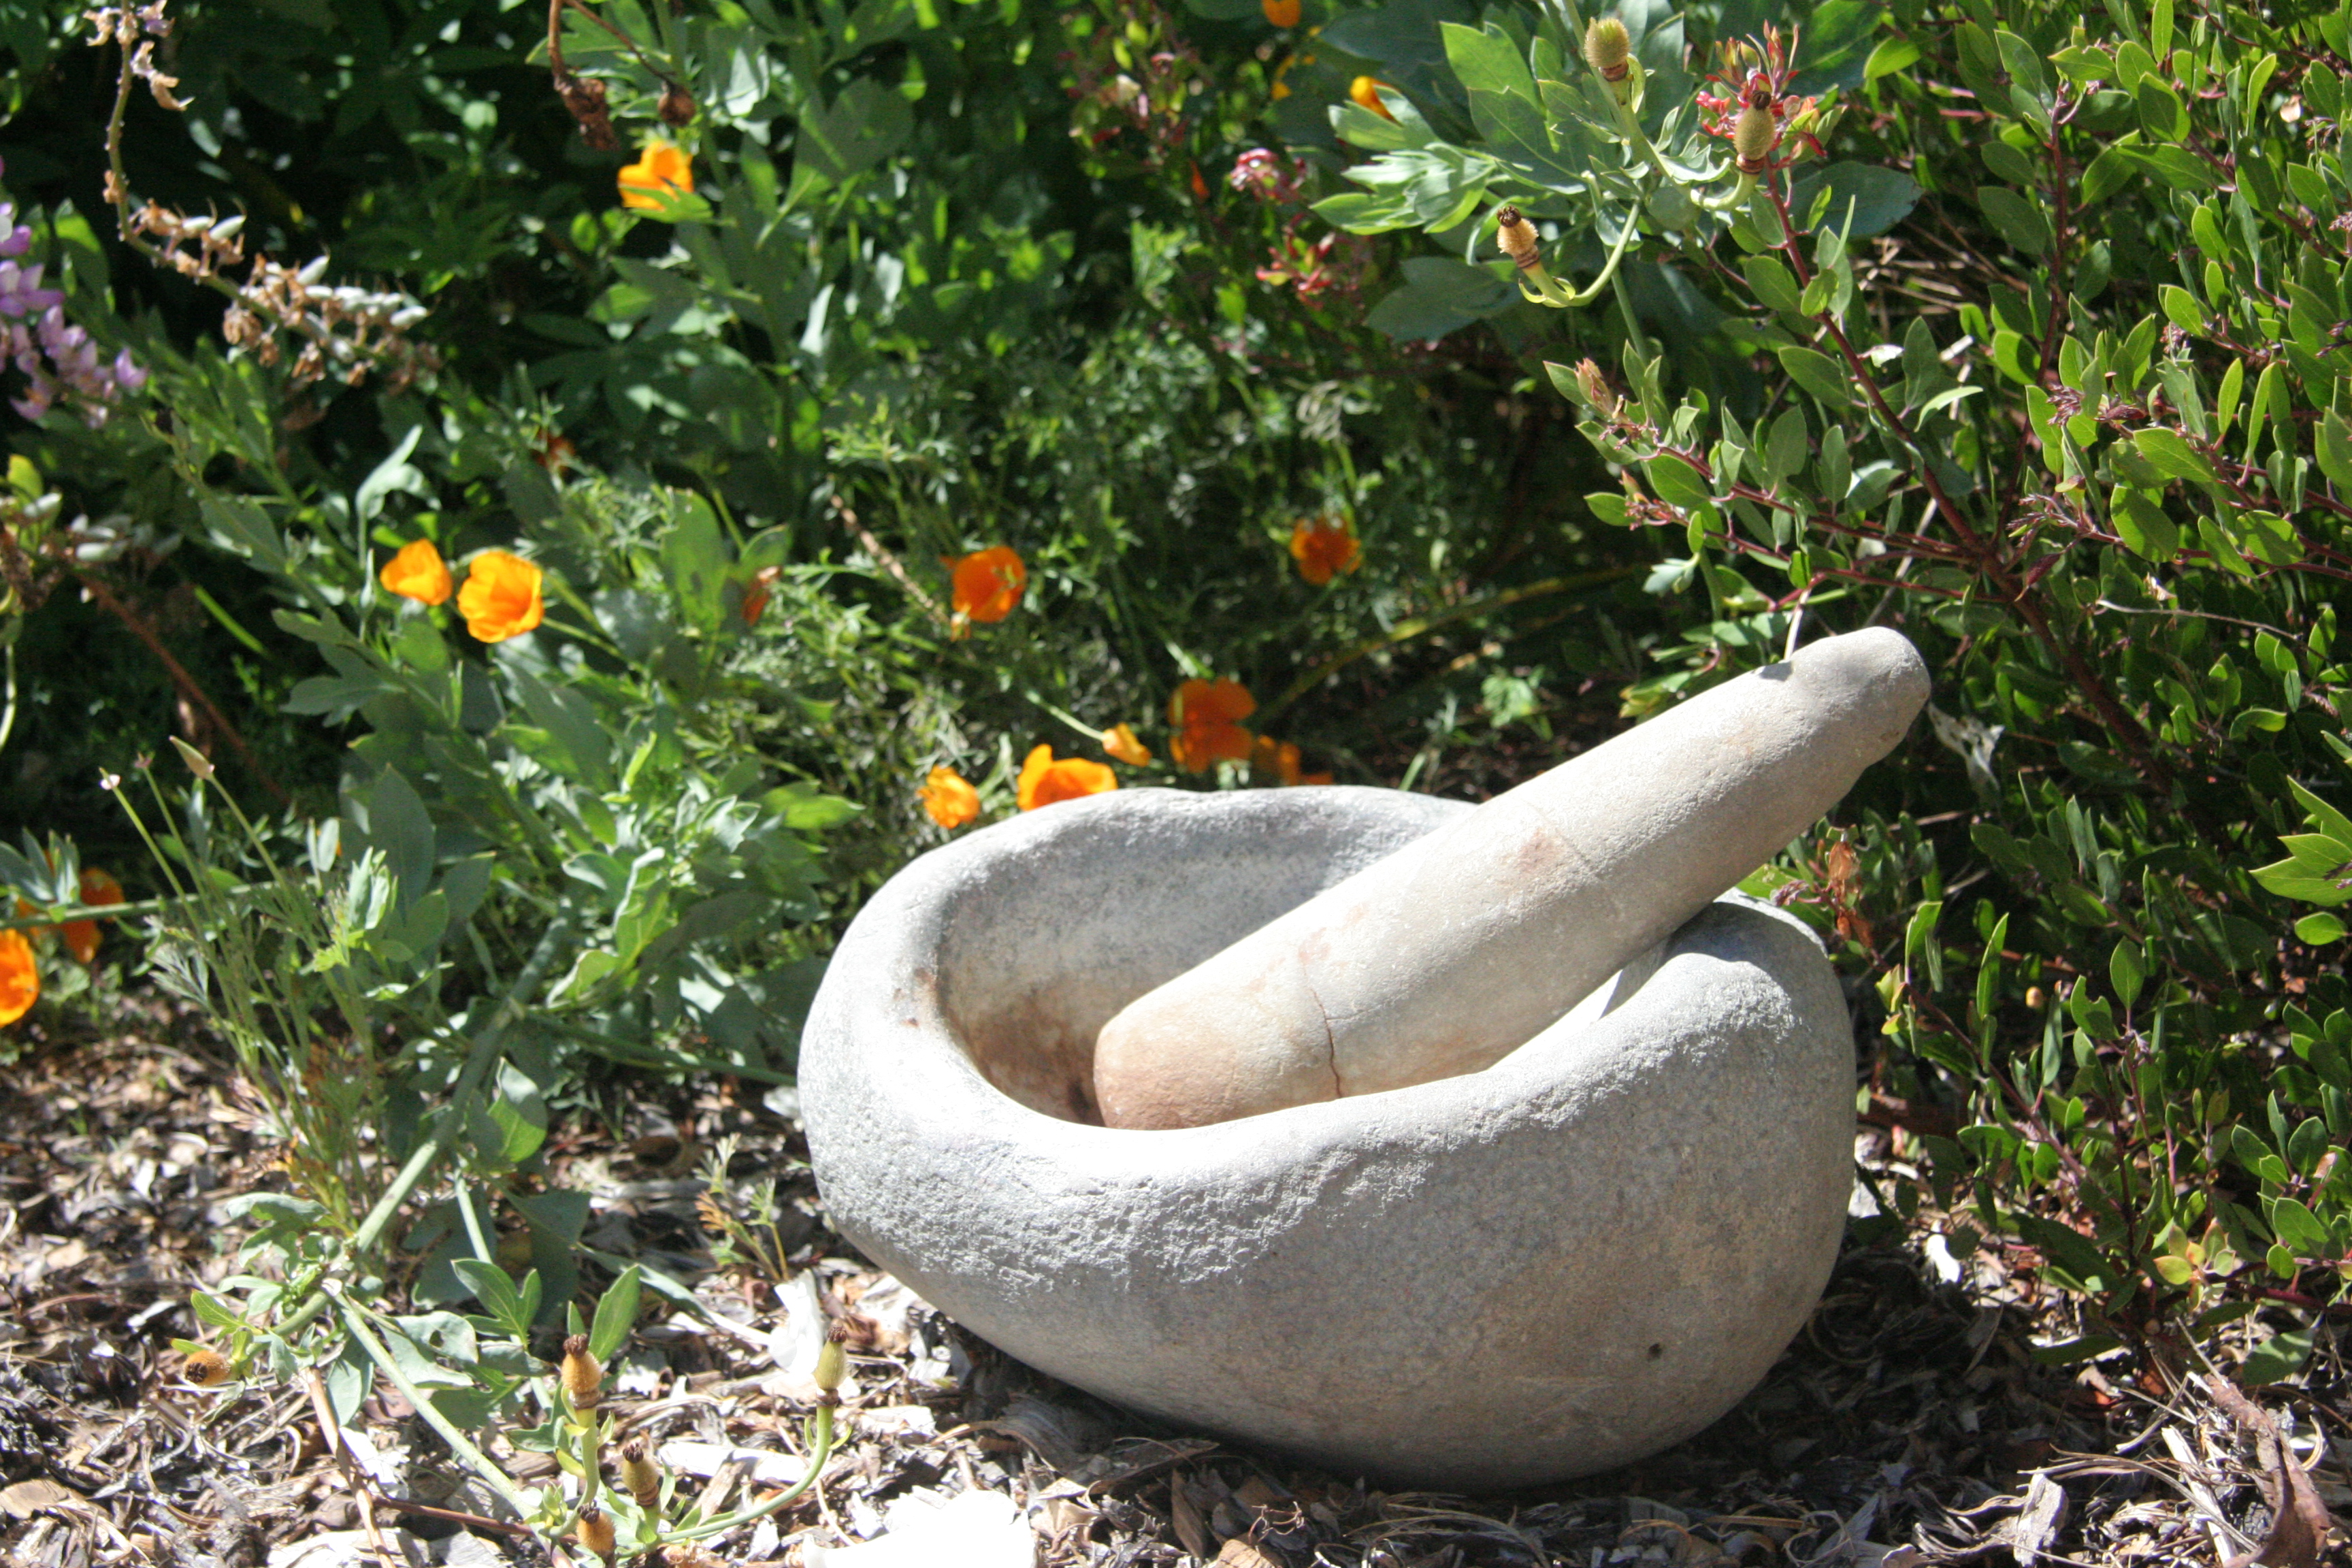 Mortar and pestle made from stone